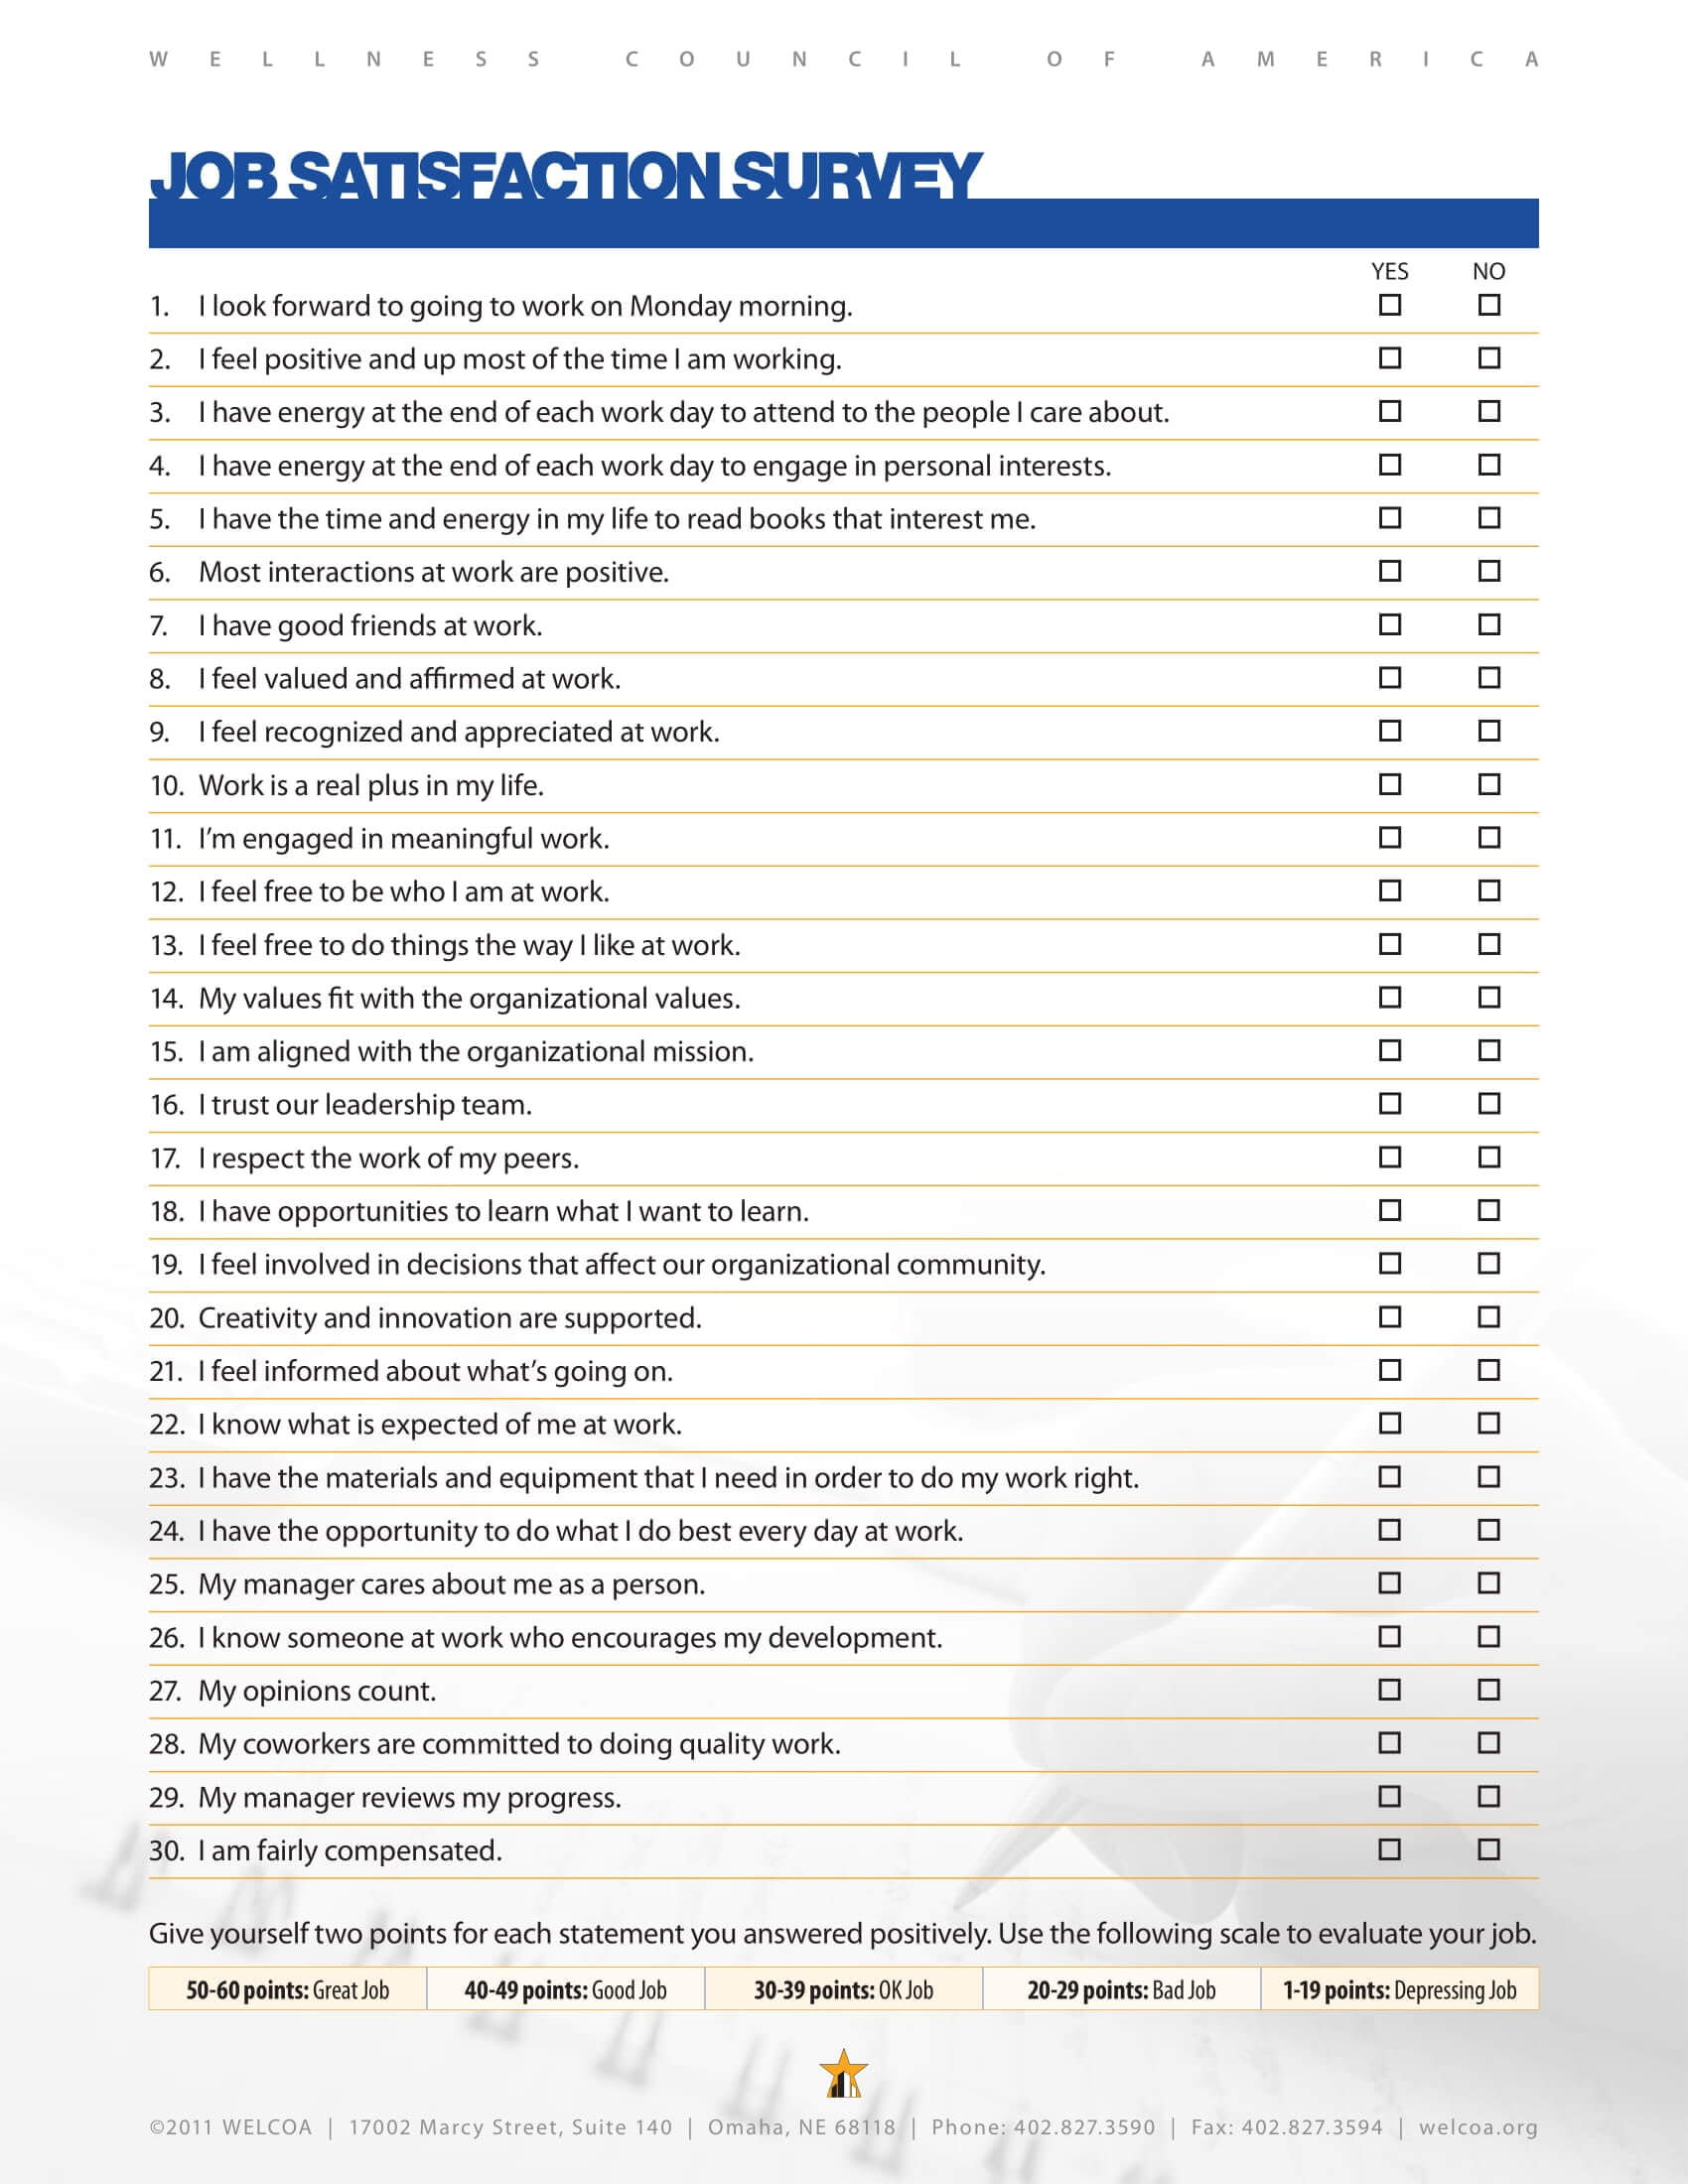 14+ Employee Satisfaction Survey Form Examples – Pdf, Doc Intended For Employee Satisfaction Survey Template Word